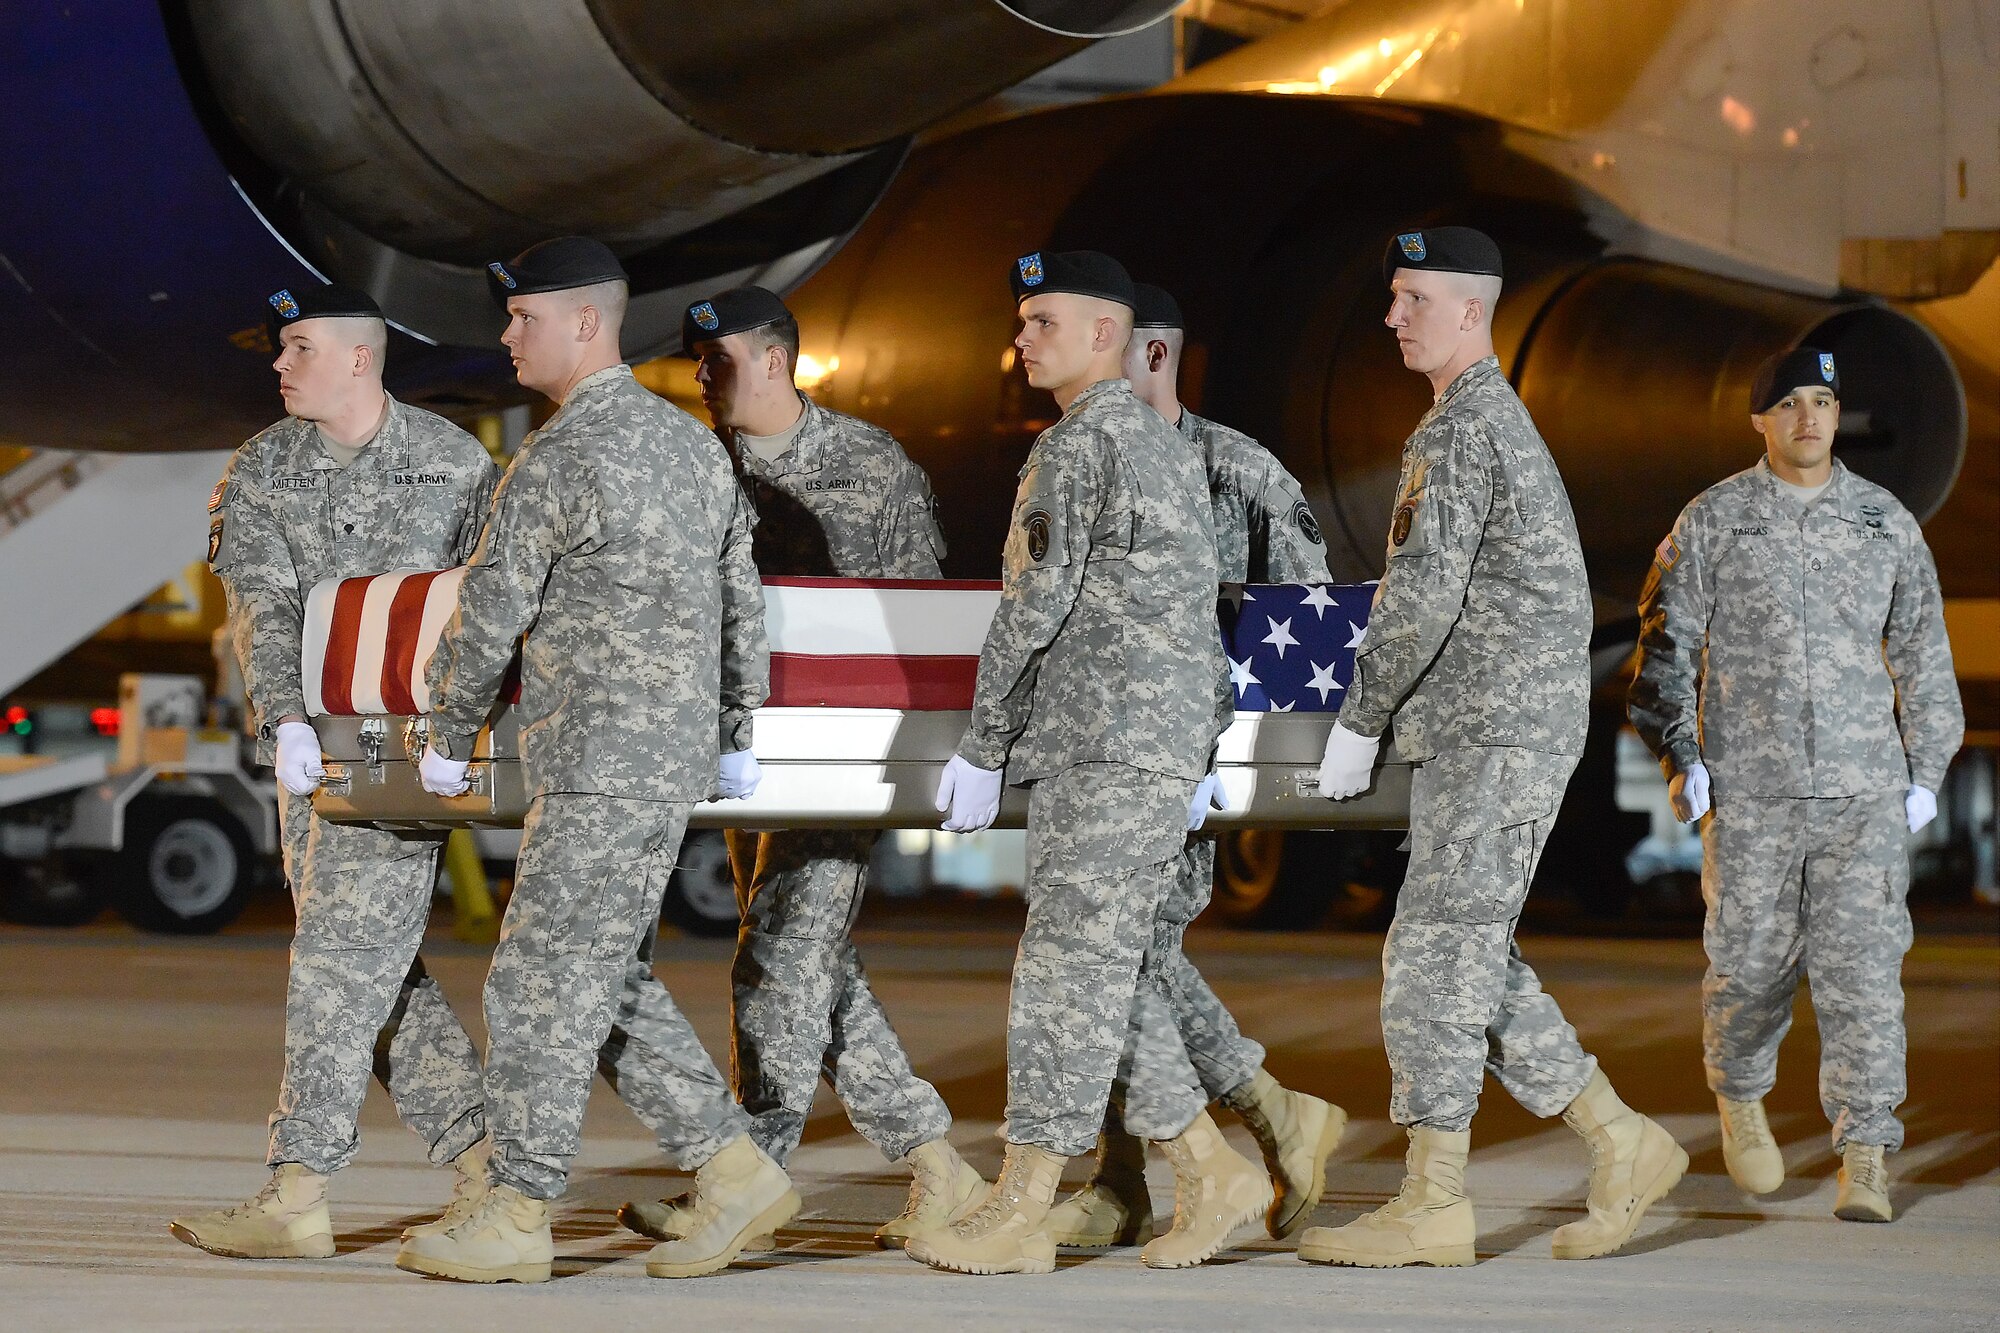 A U.S. Army carry team transfers the remains of Pfc. Charles P. McClure of Stratford, Okla., during a dignified transfer May 4, 2013 at Dover Air Force Base, Del. McClure was assigned to 4th Battalion, 42nd Field Artillery Regiment, 1st Combat Team, 4th Infantry Division, Ft. Carson, Colo. (U.S. Air Force photo/Greg L. Davis)